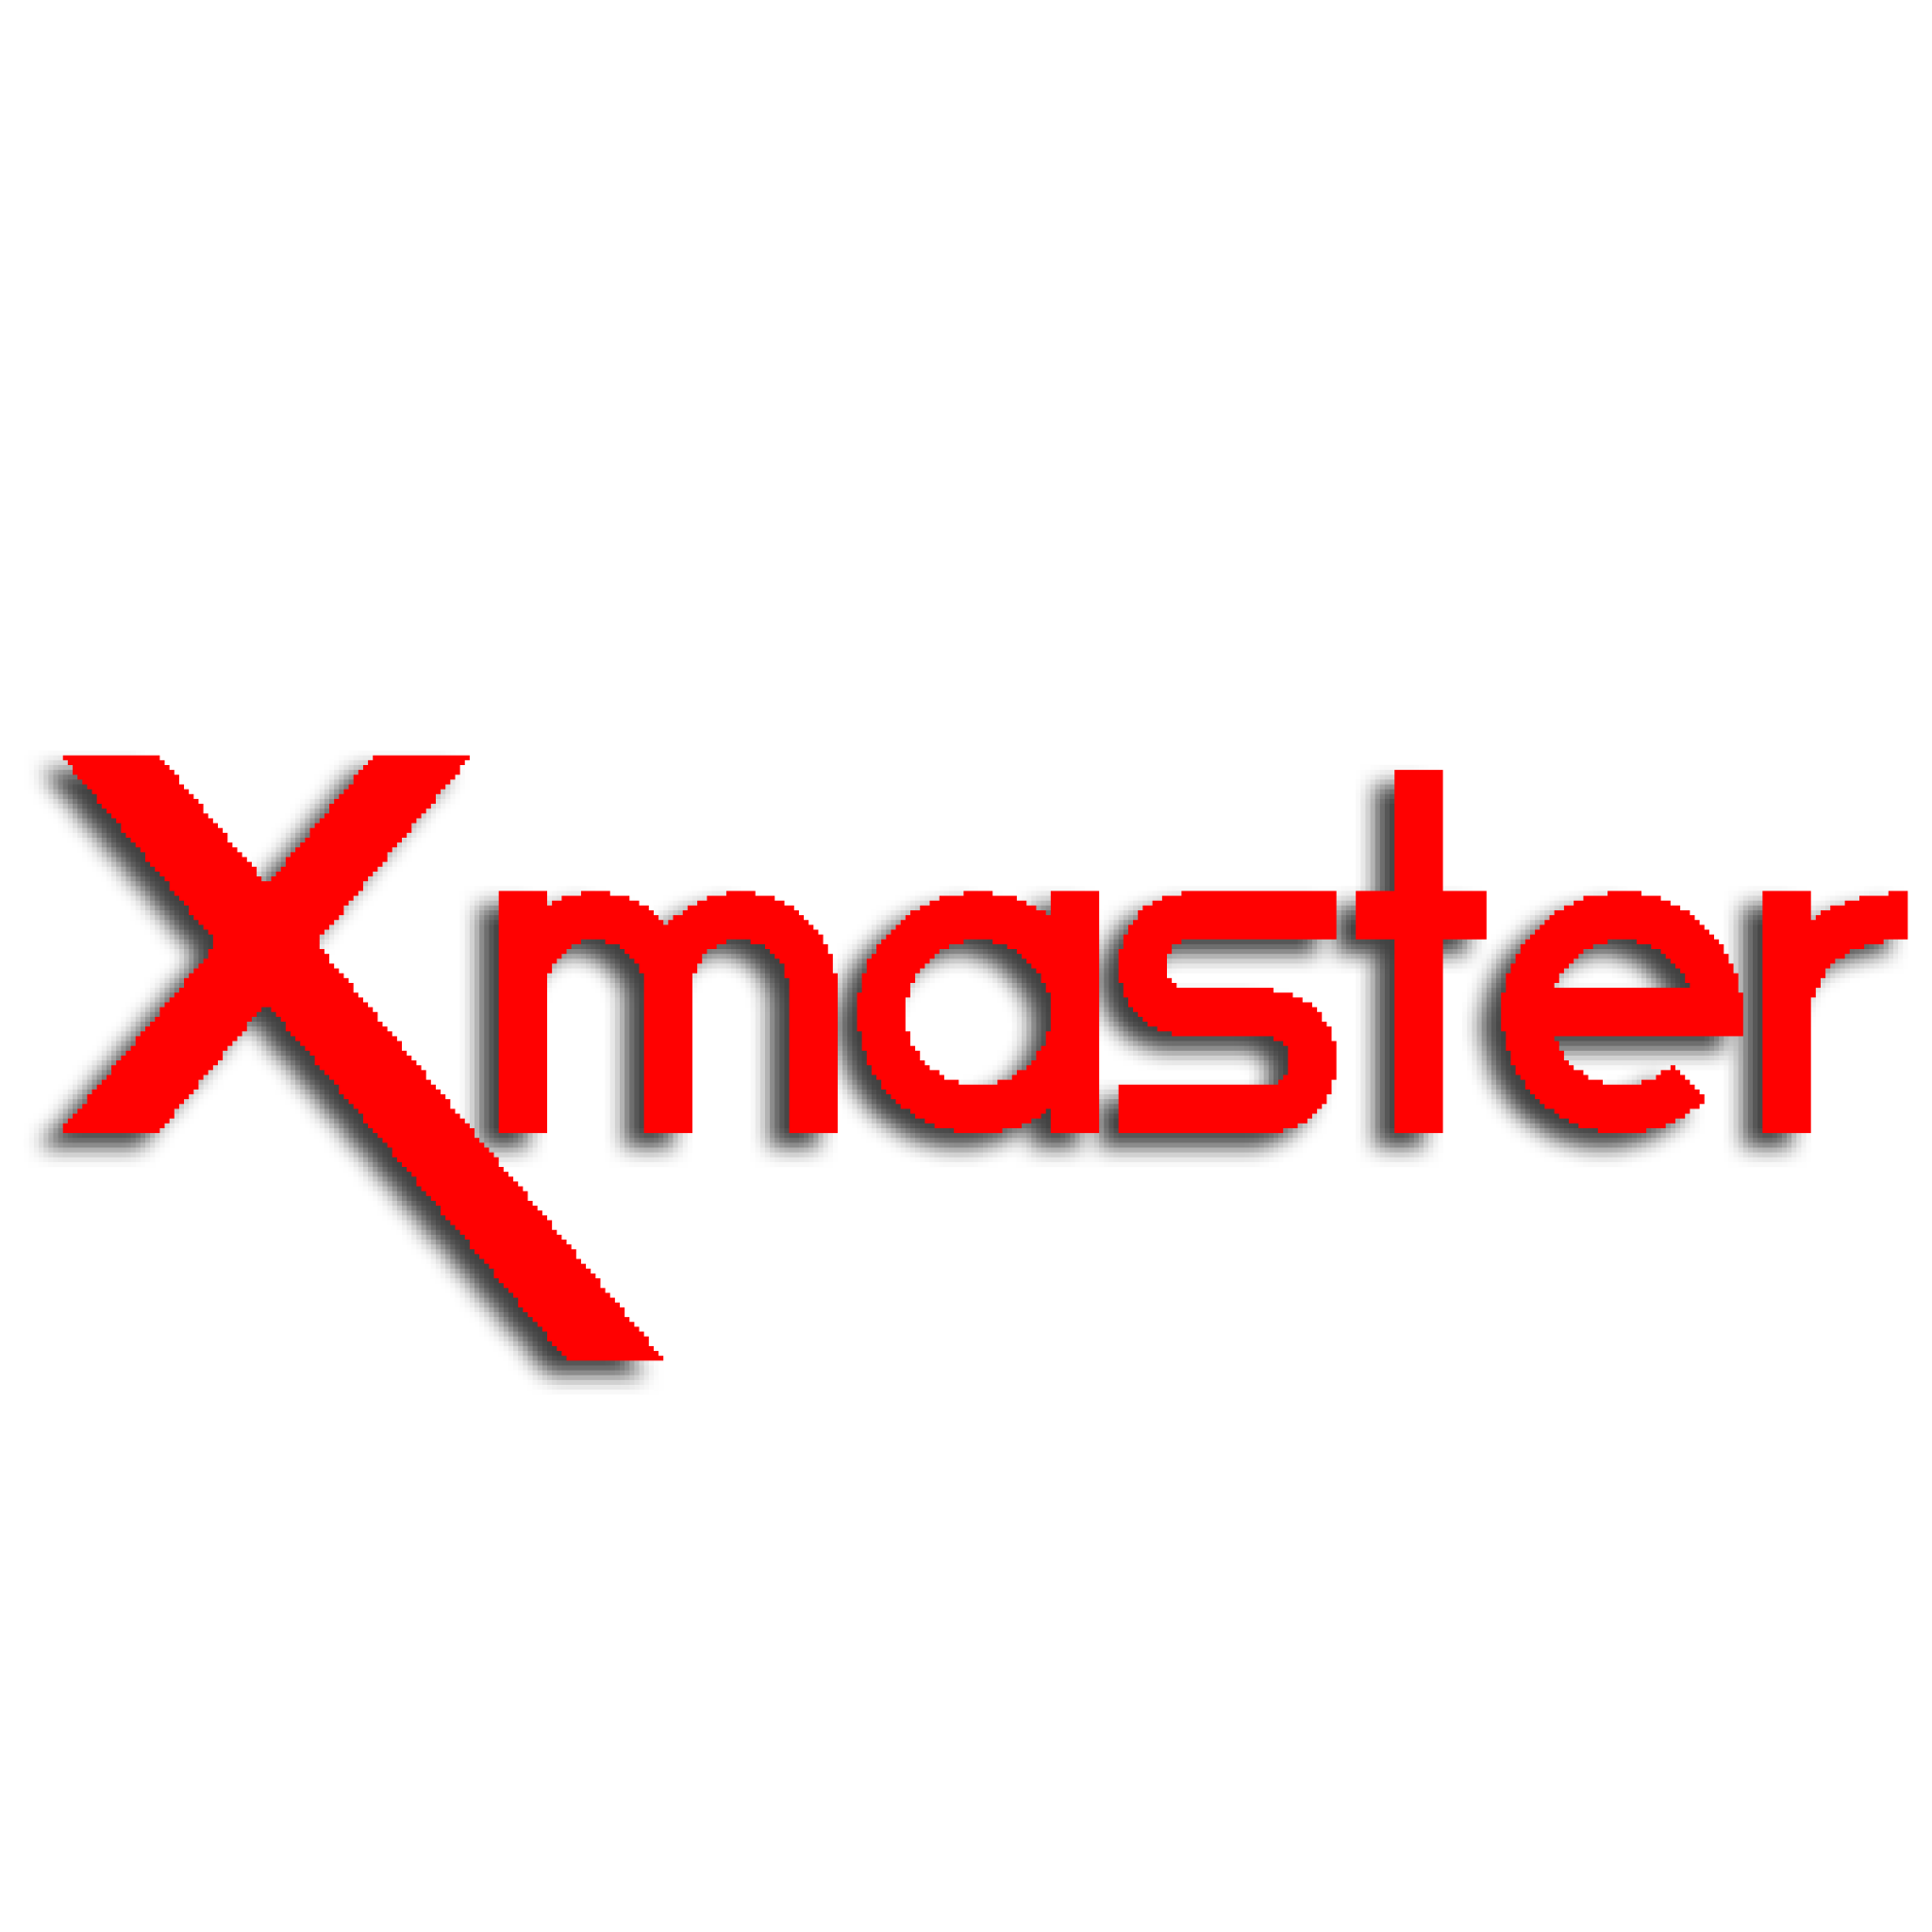 My name is Xmaster and I am a DJ/Producer. 